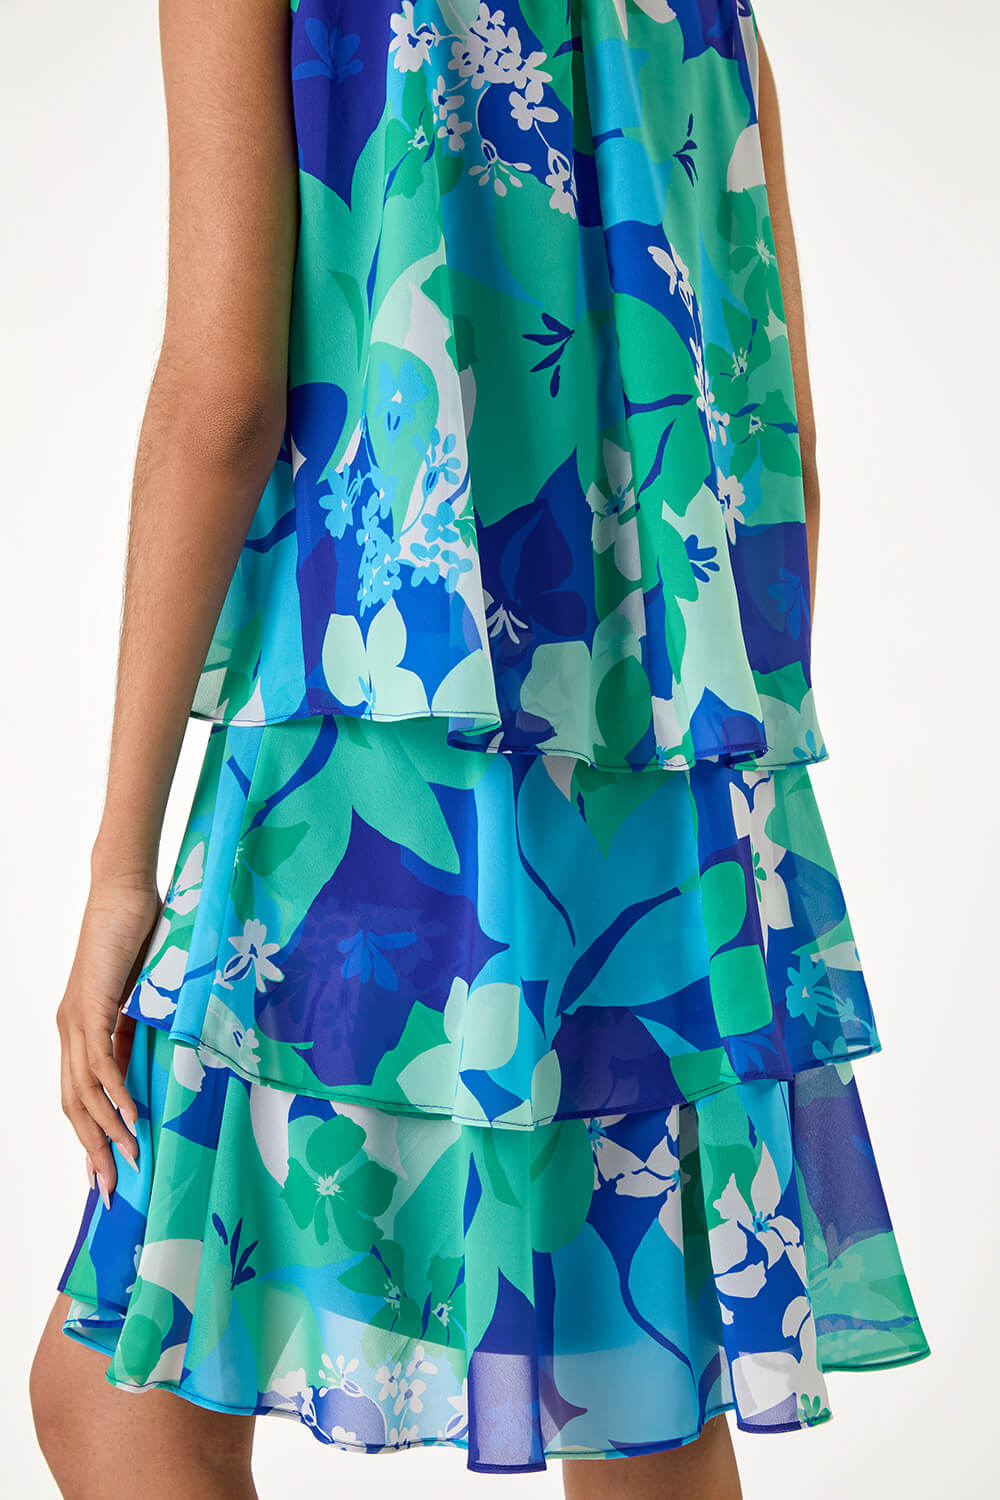 Blue Floral Print Tiered Layer Dress, Image 5 of 5